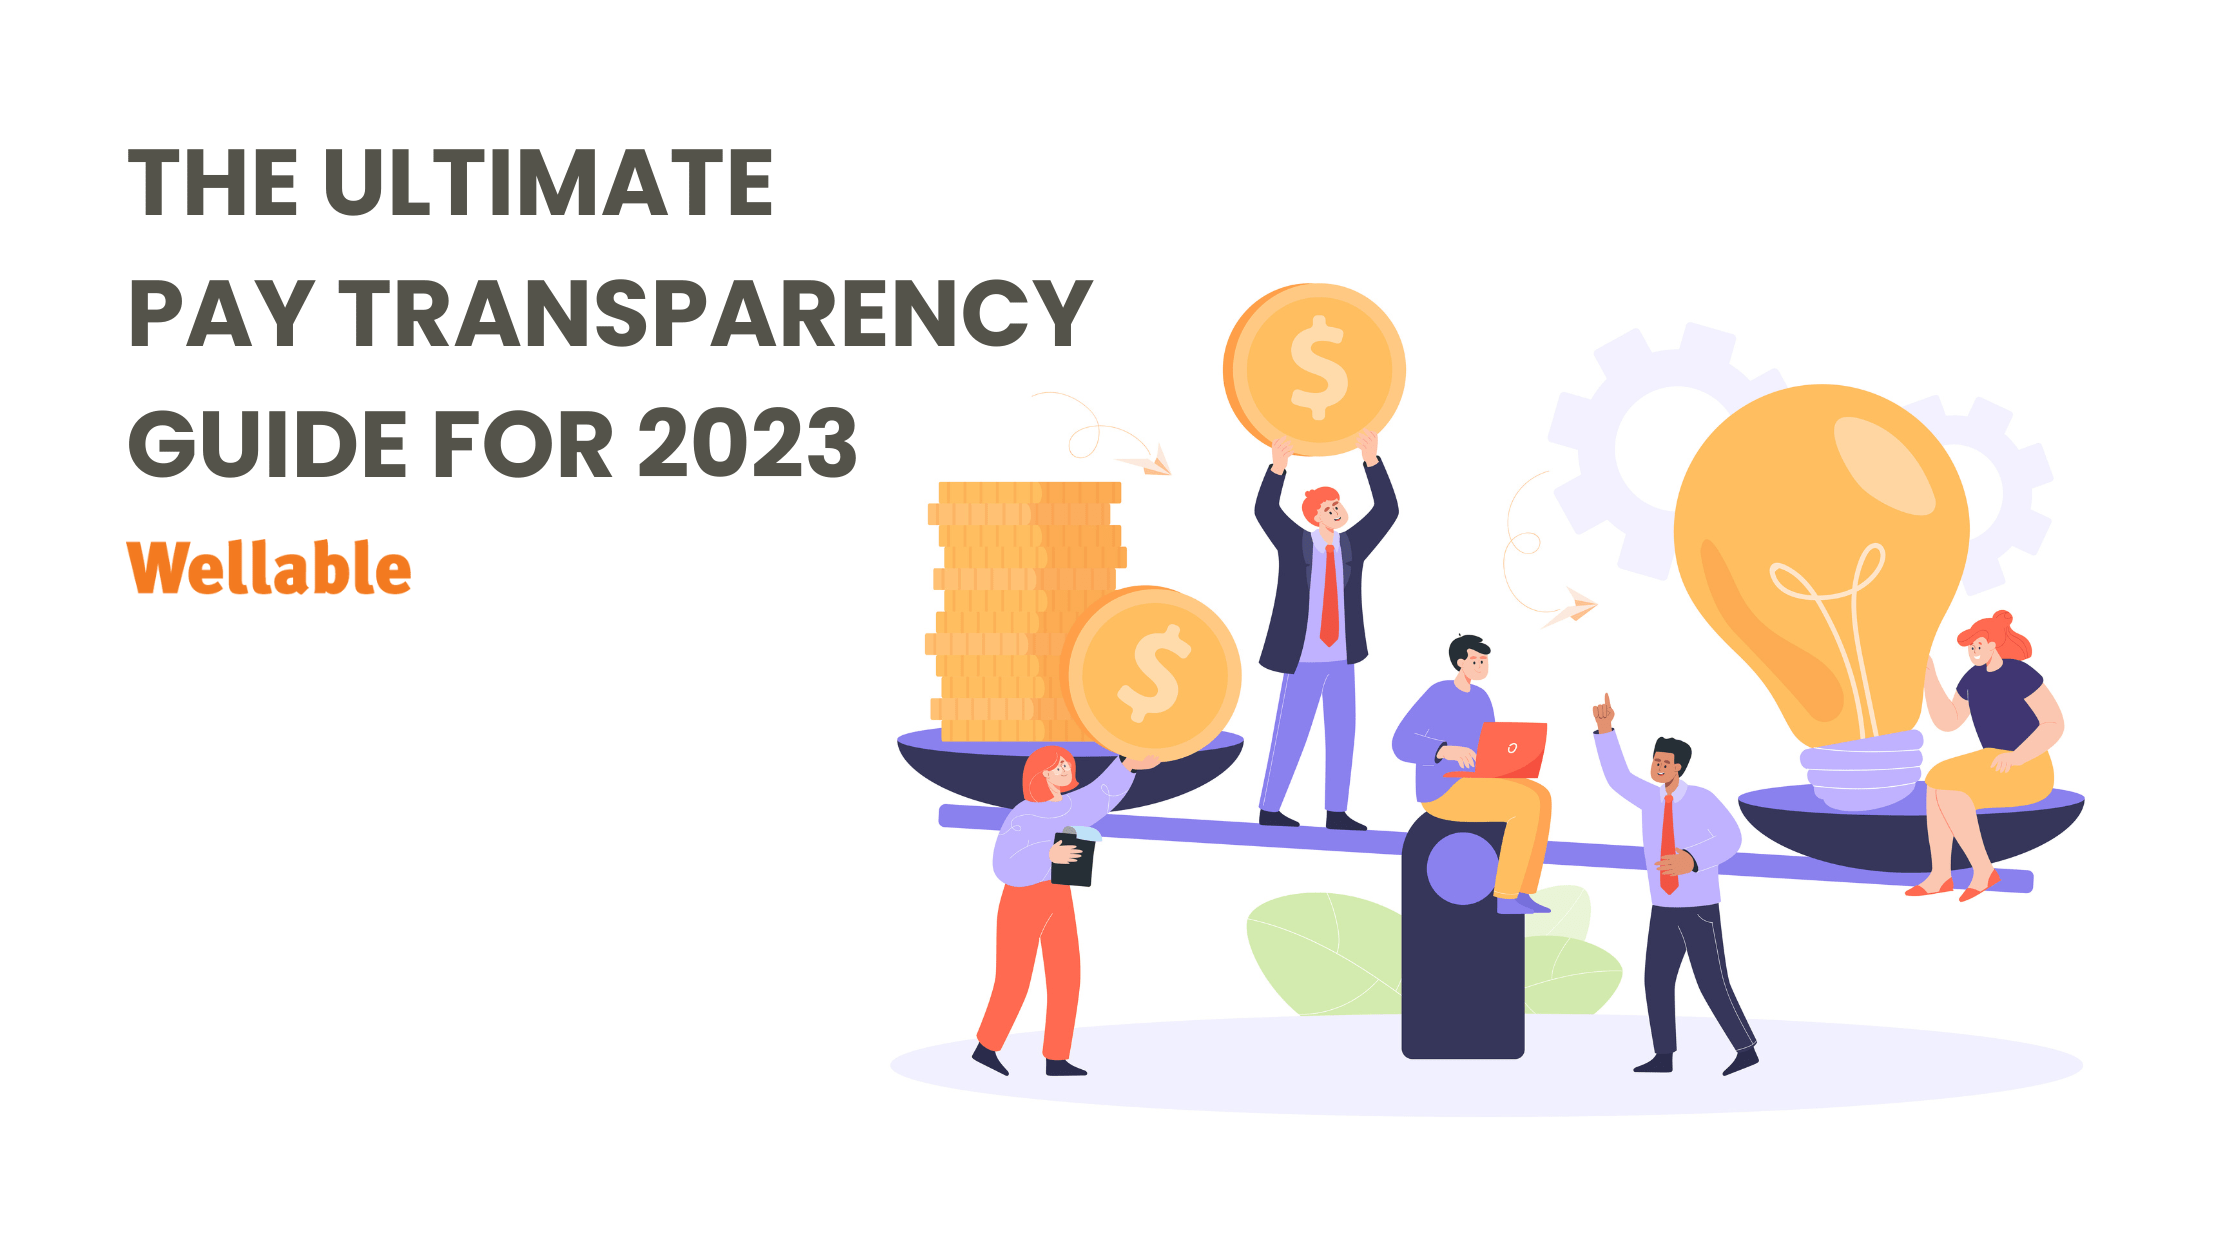 The Ultimate Pay Transparency Guide For 2023